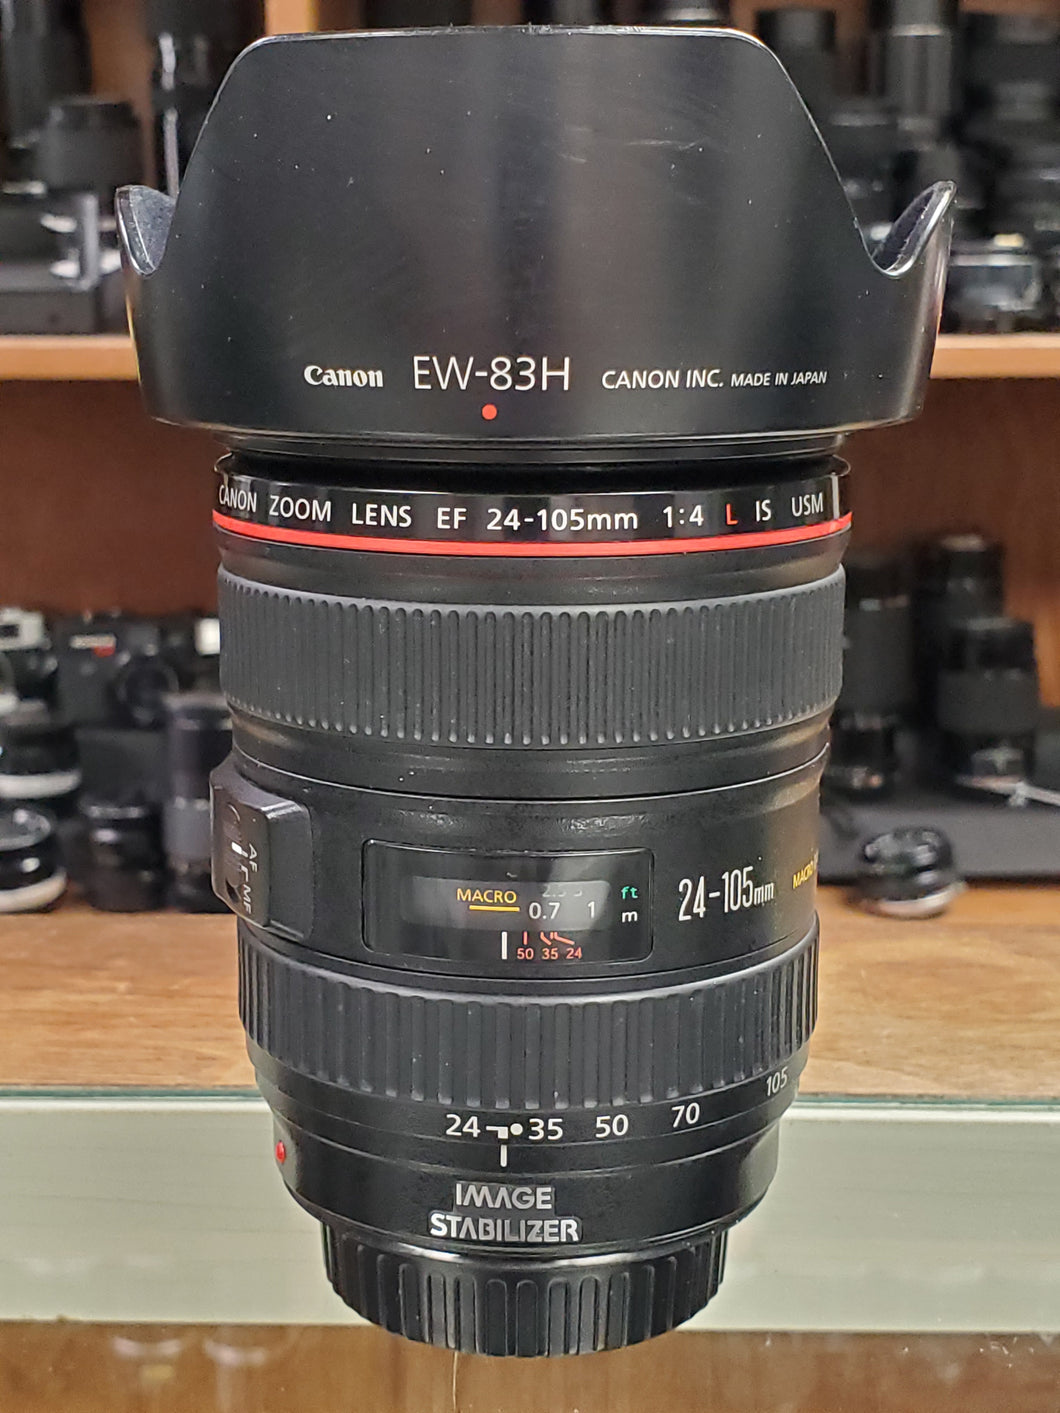 Canon 24-105mm F4L IS USM Zoom lens - Pro Full Frame - Used Condition 9/10 - Paramount Camera & Repair